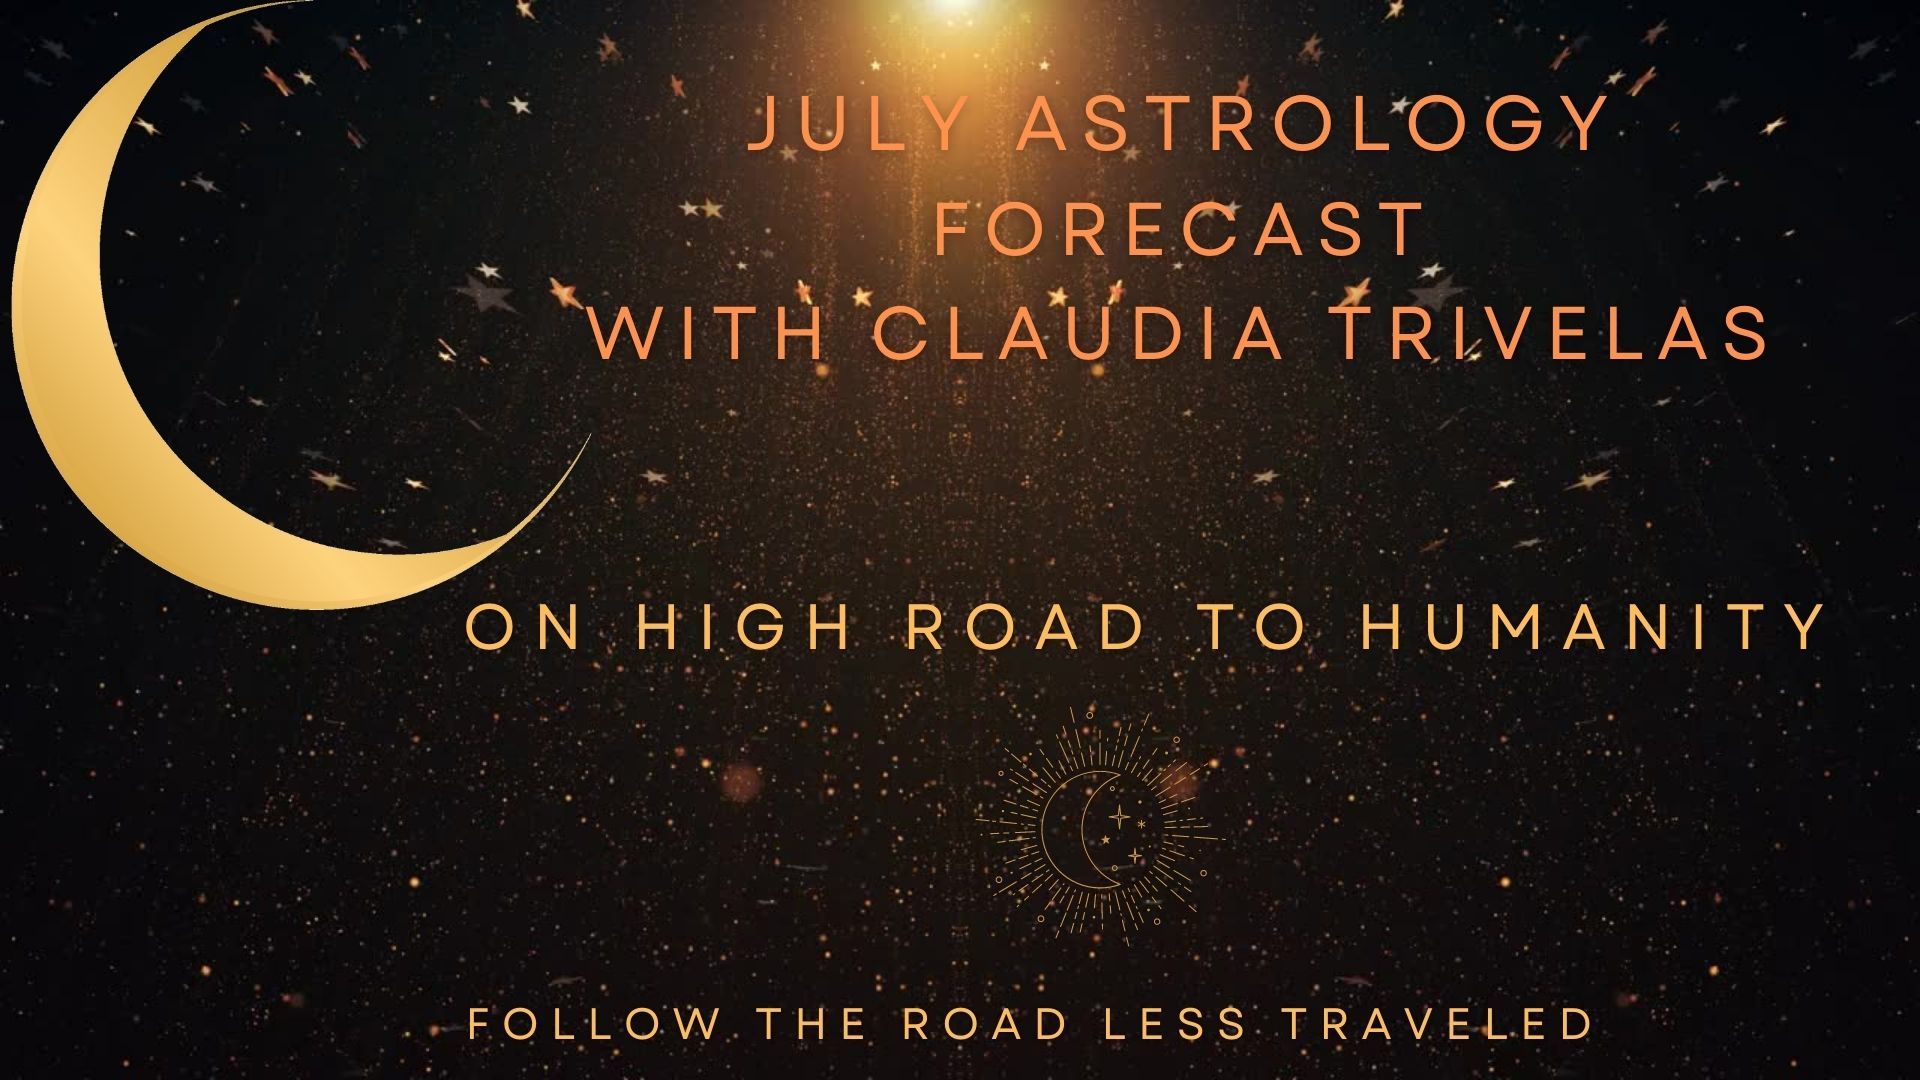 Astrology Forecase for July 2022 with Claudia Trivelas on High Road to Humanity